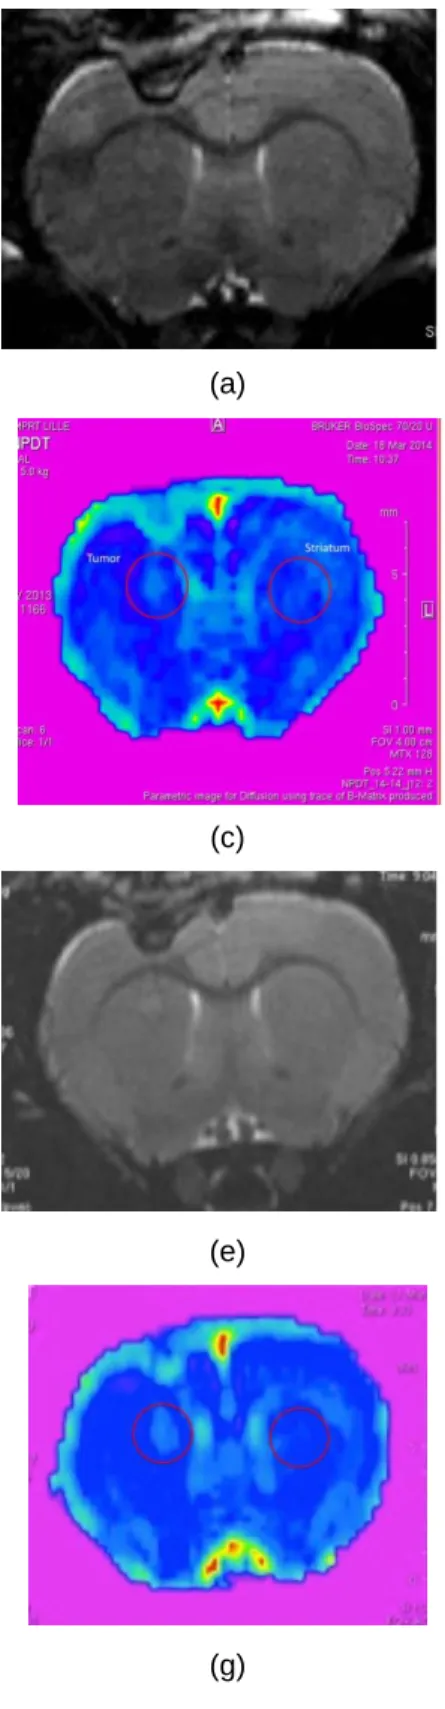 Figure 3: Pre- and postoperative MRI examination of rat #14, which belonged to the sham group